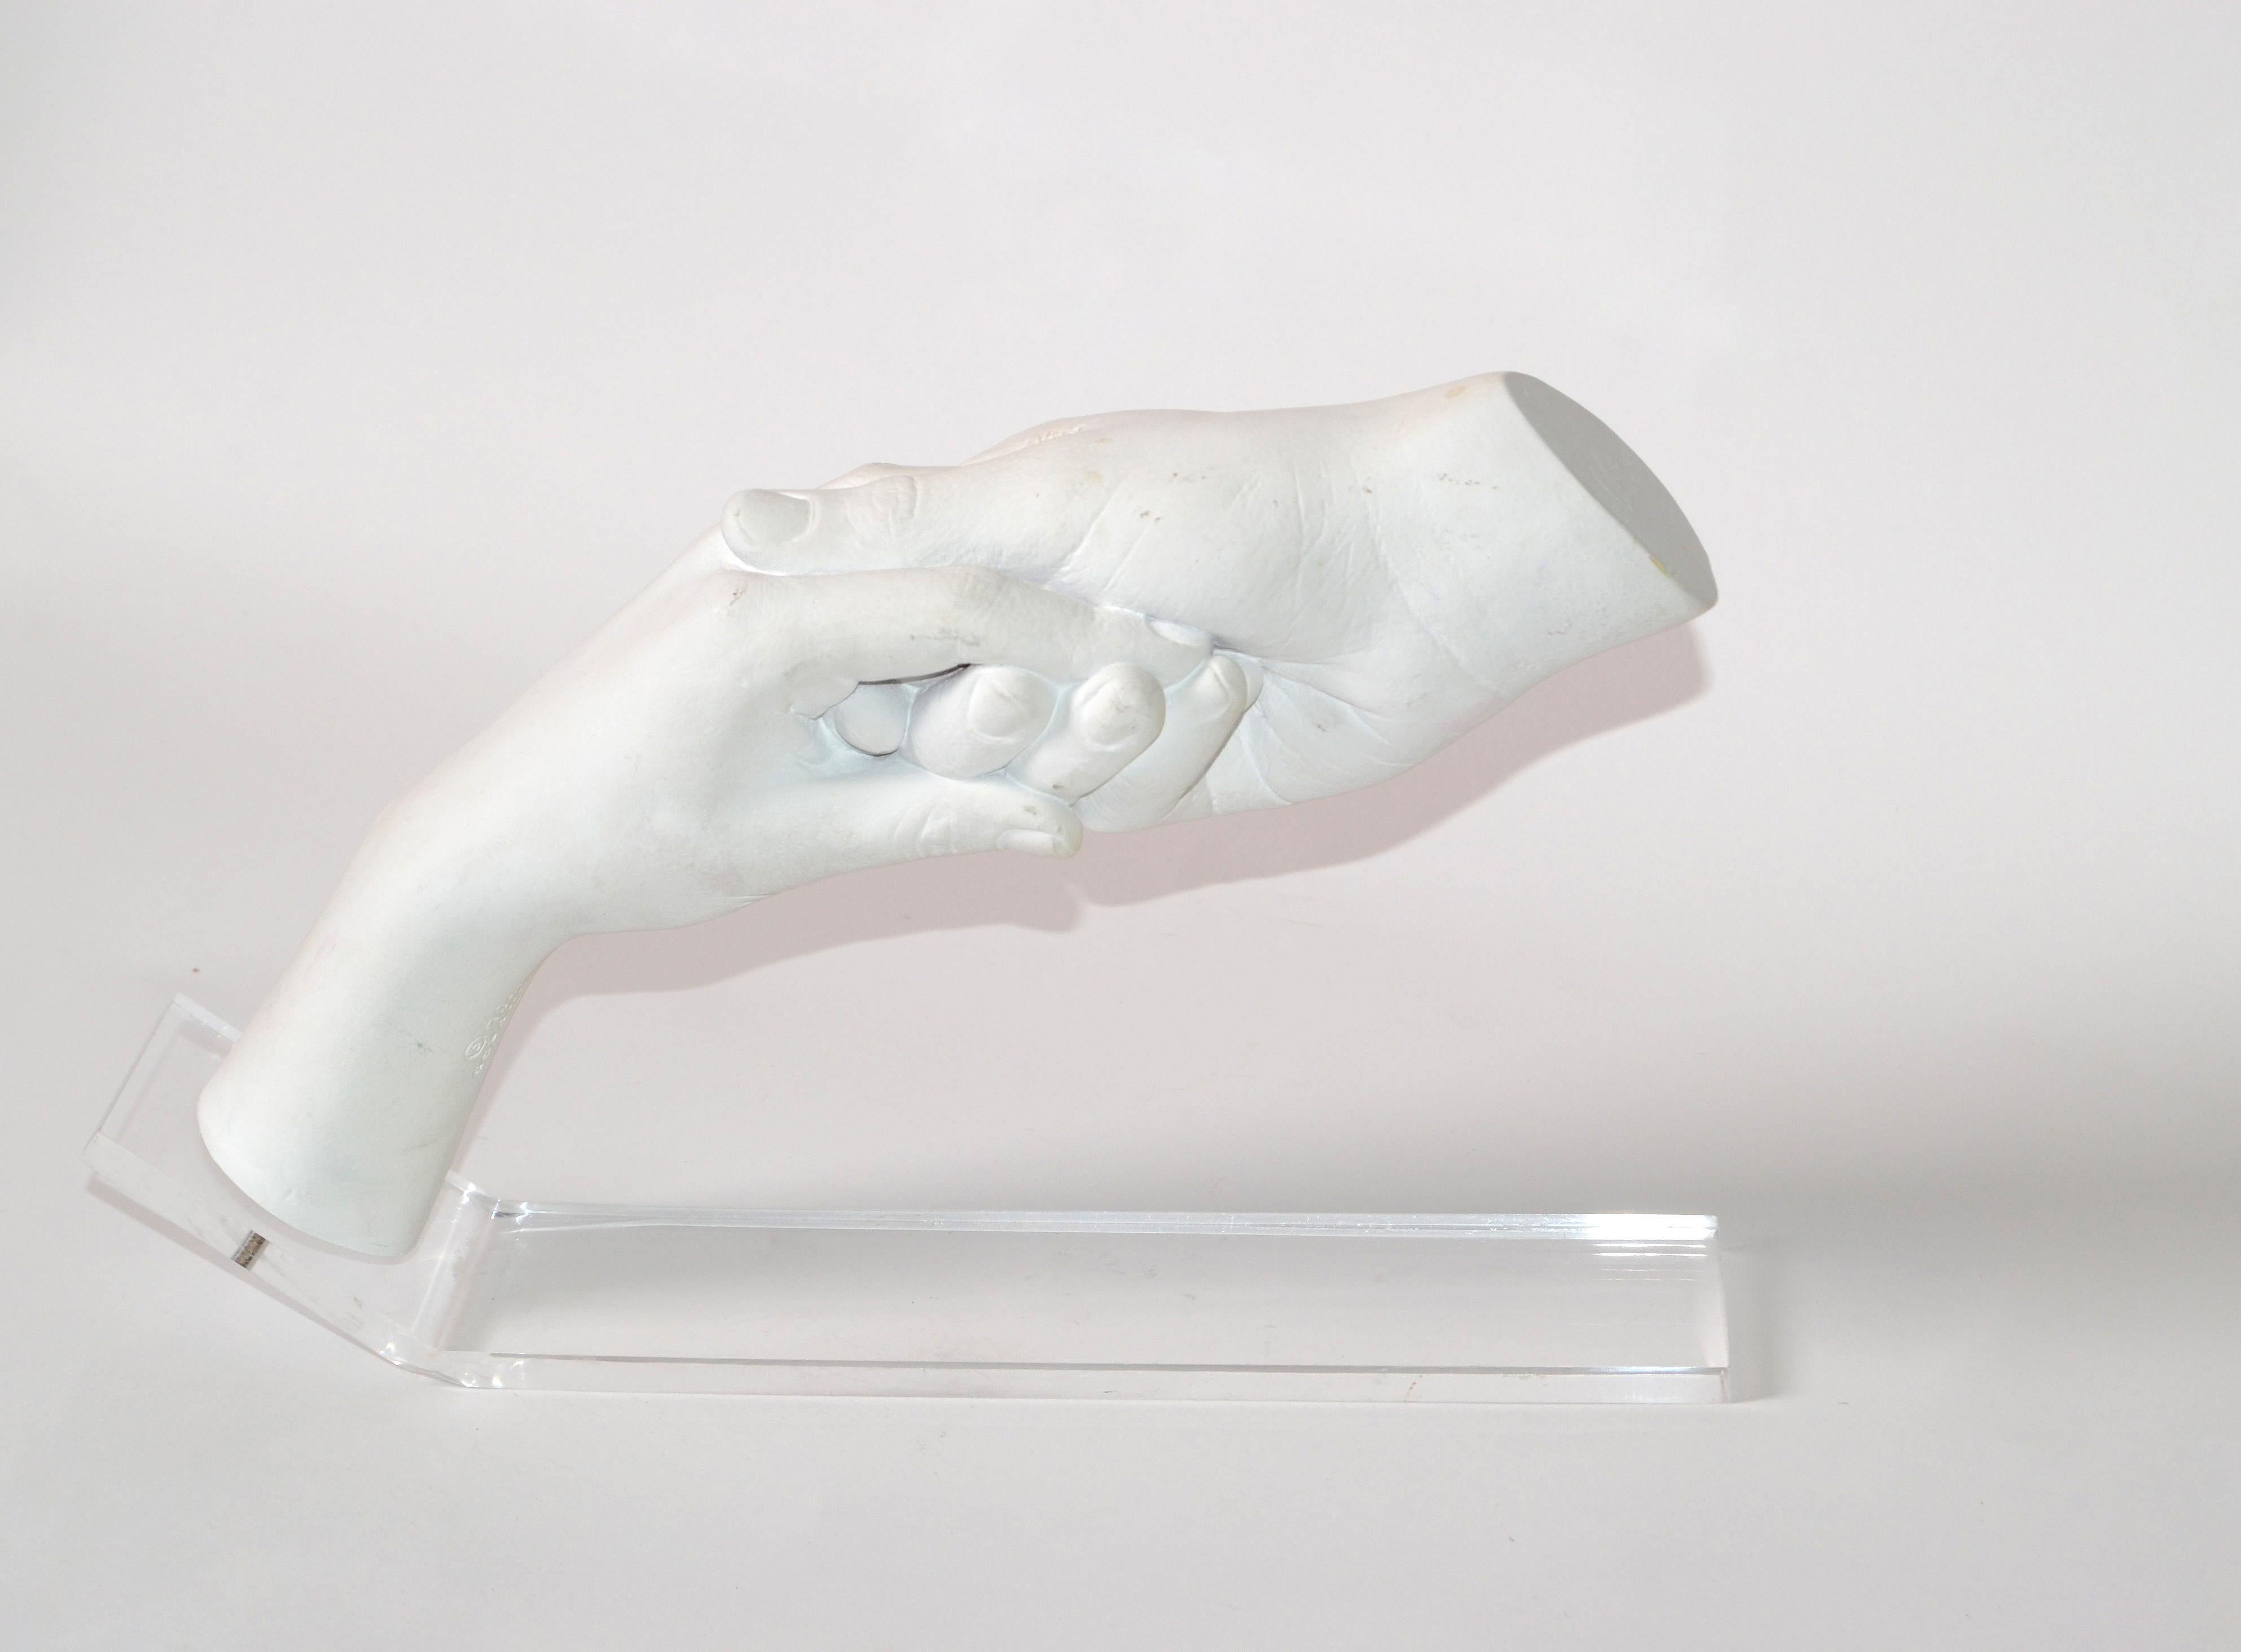 A Mid-Century Modern plaster table sculpture of a man and woman holding hands.
Mounted gracefully on a polished Lucite base.
The Artist-signed the sculpture with Cutrone, 1984.
Austin Prod. INC Trademark, dated 1984 at the wrist of the lady's